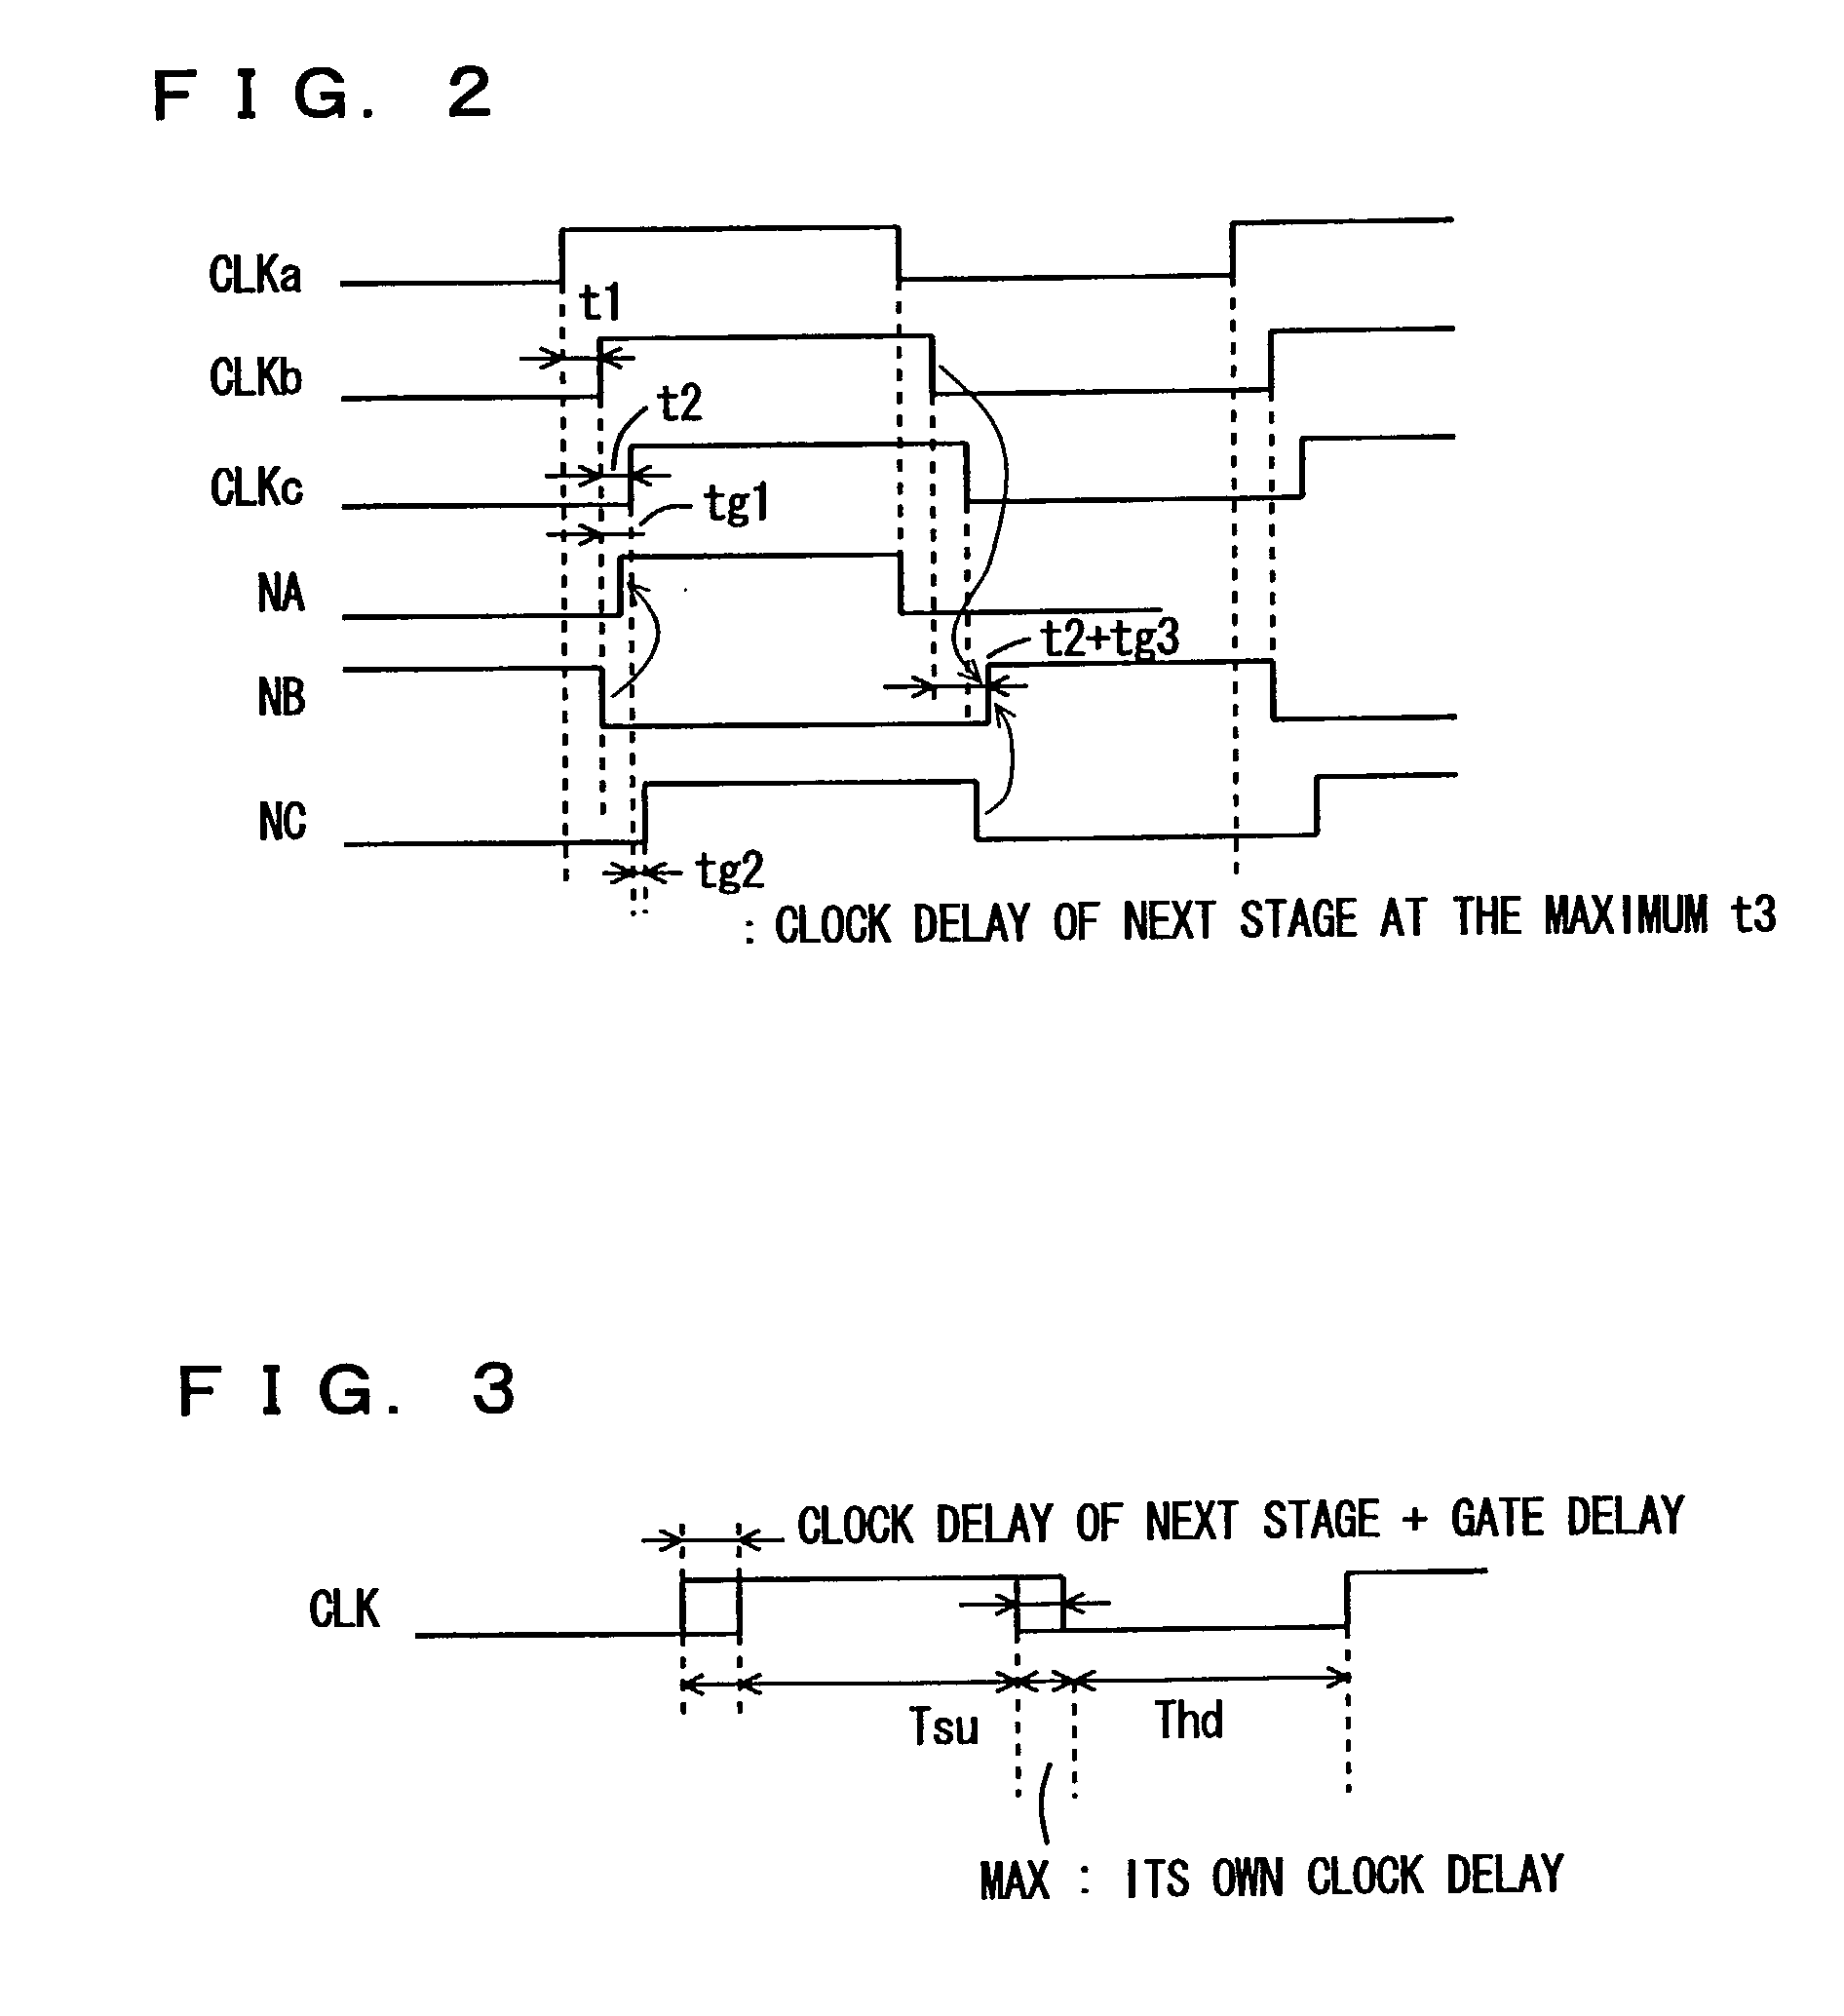 Synchronous signal transfer and processing device